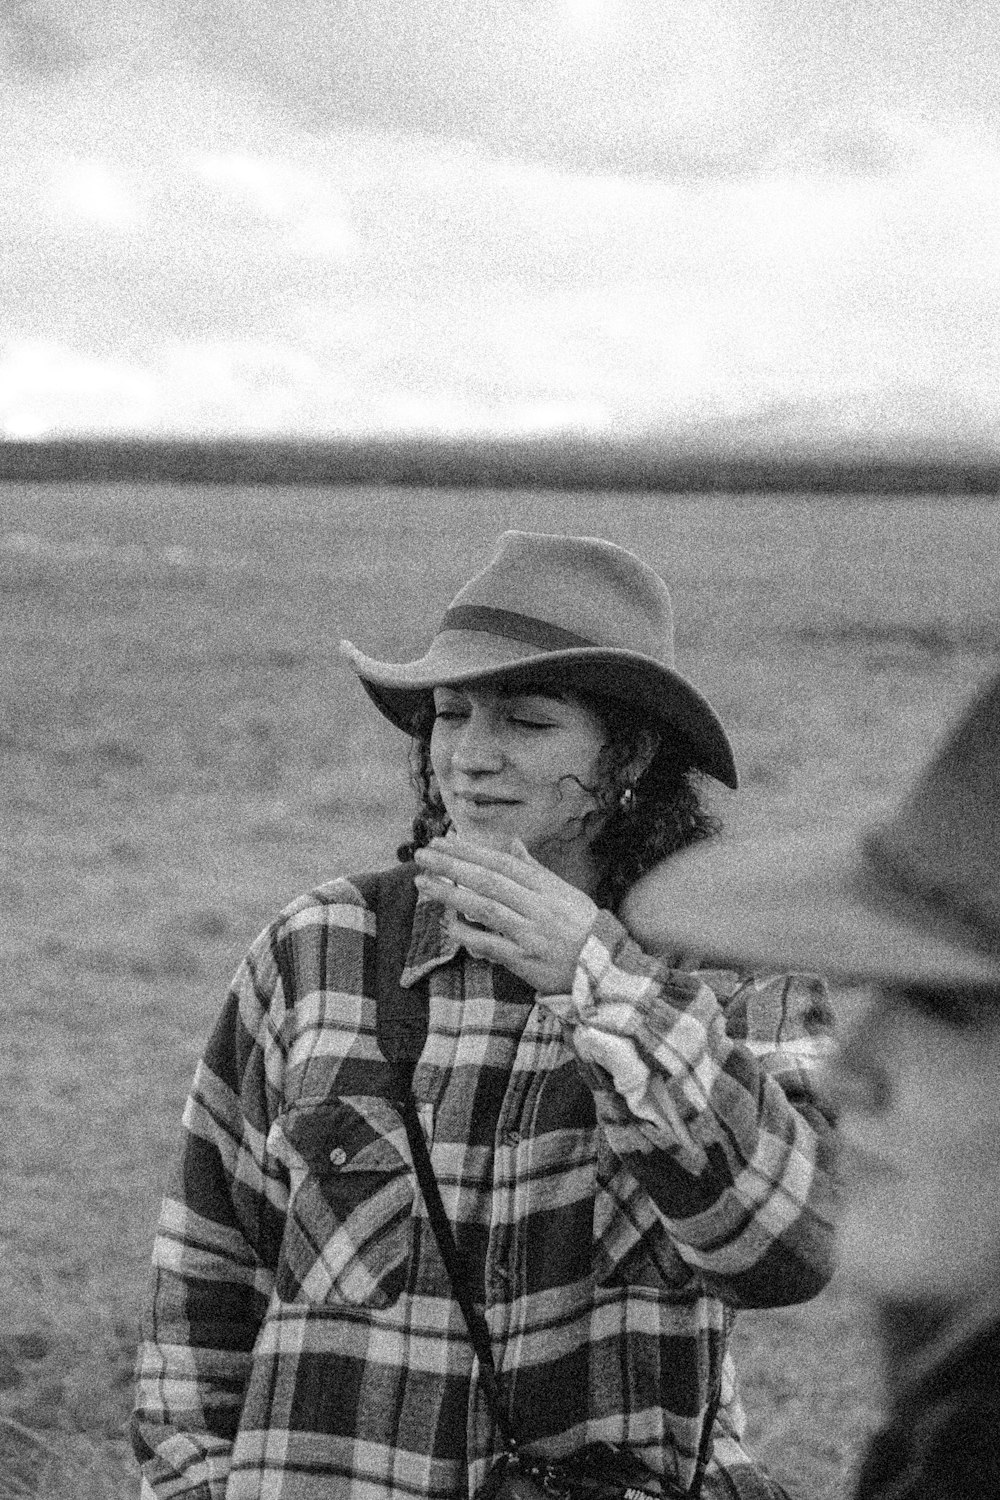 grayscale photo of man wearing hat and plaid shirt